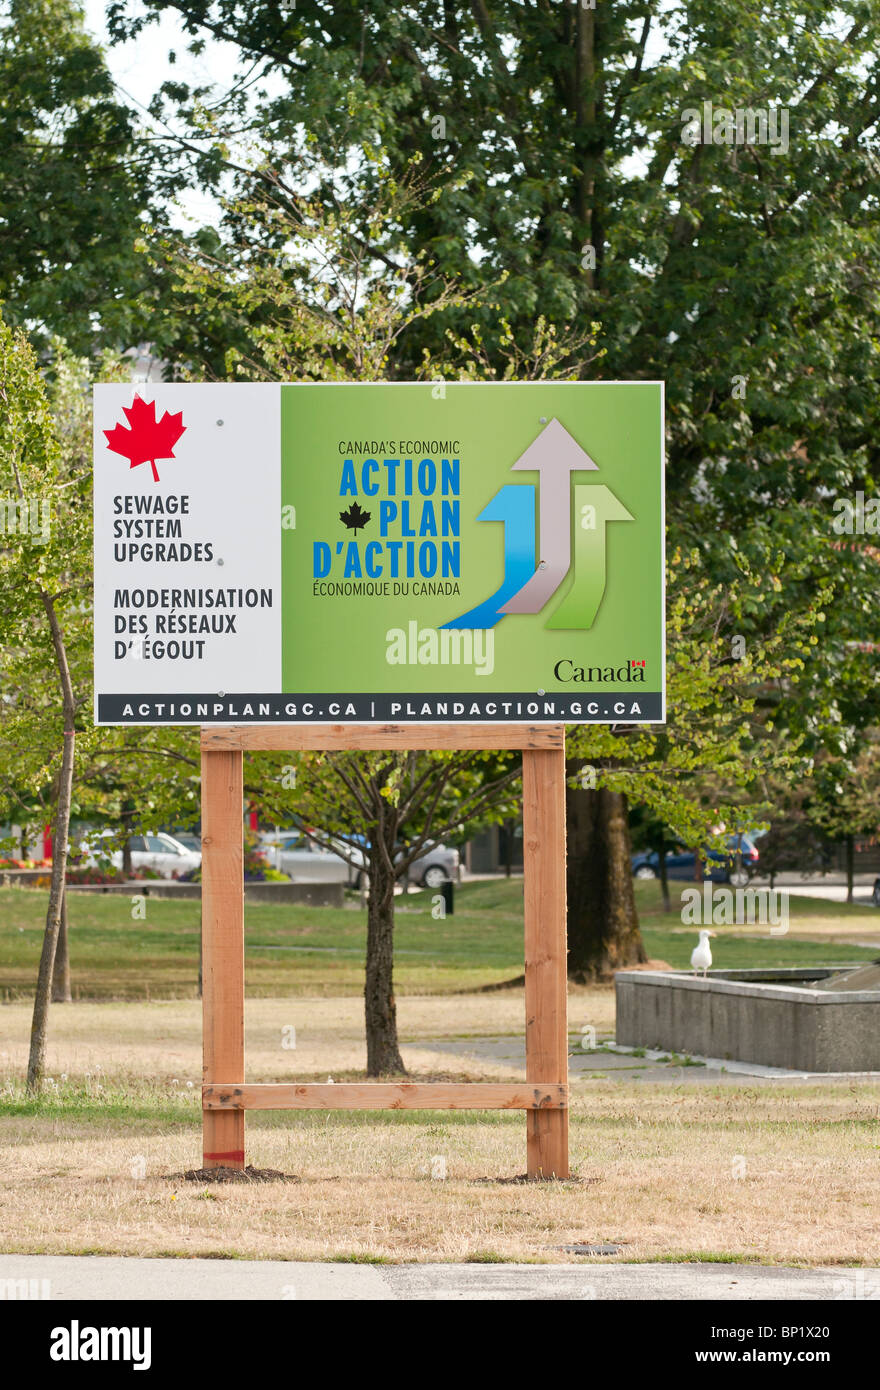 A  Canadian Government 'Economic Action Plan' infrastructure stimulus project (sewage system upgrade) sign. Stock Photo